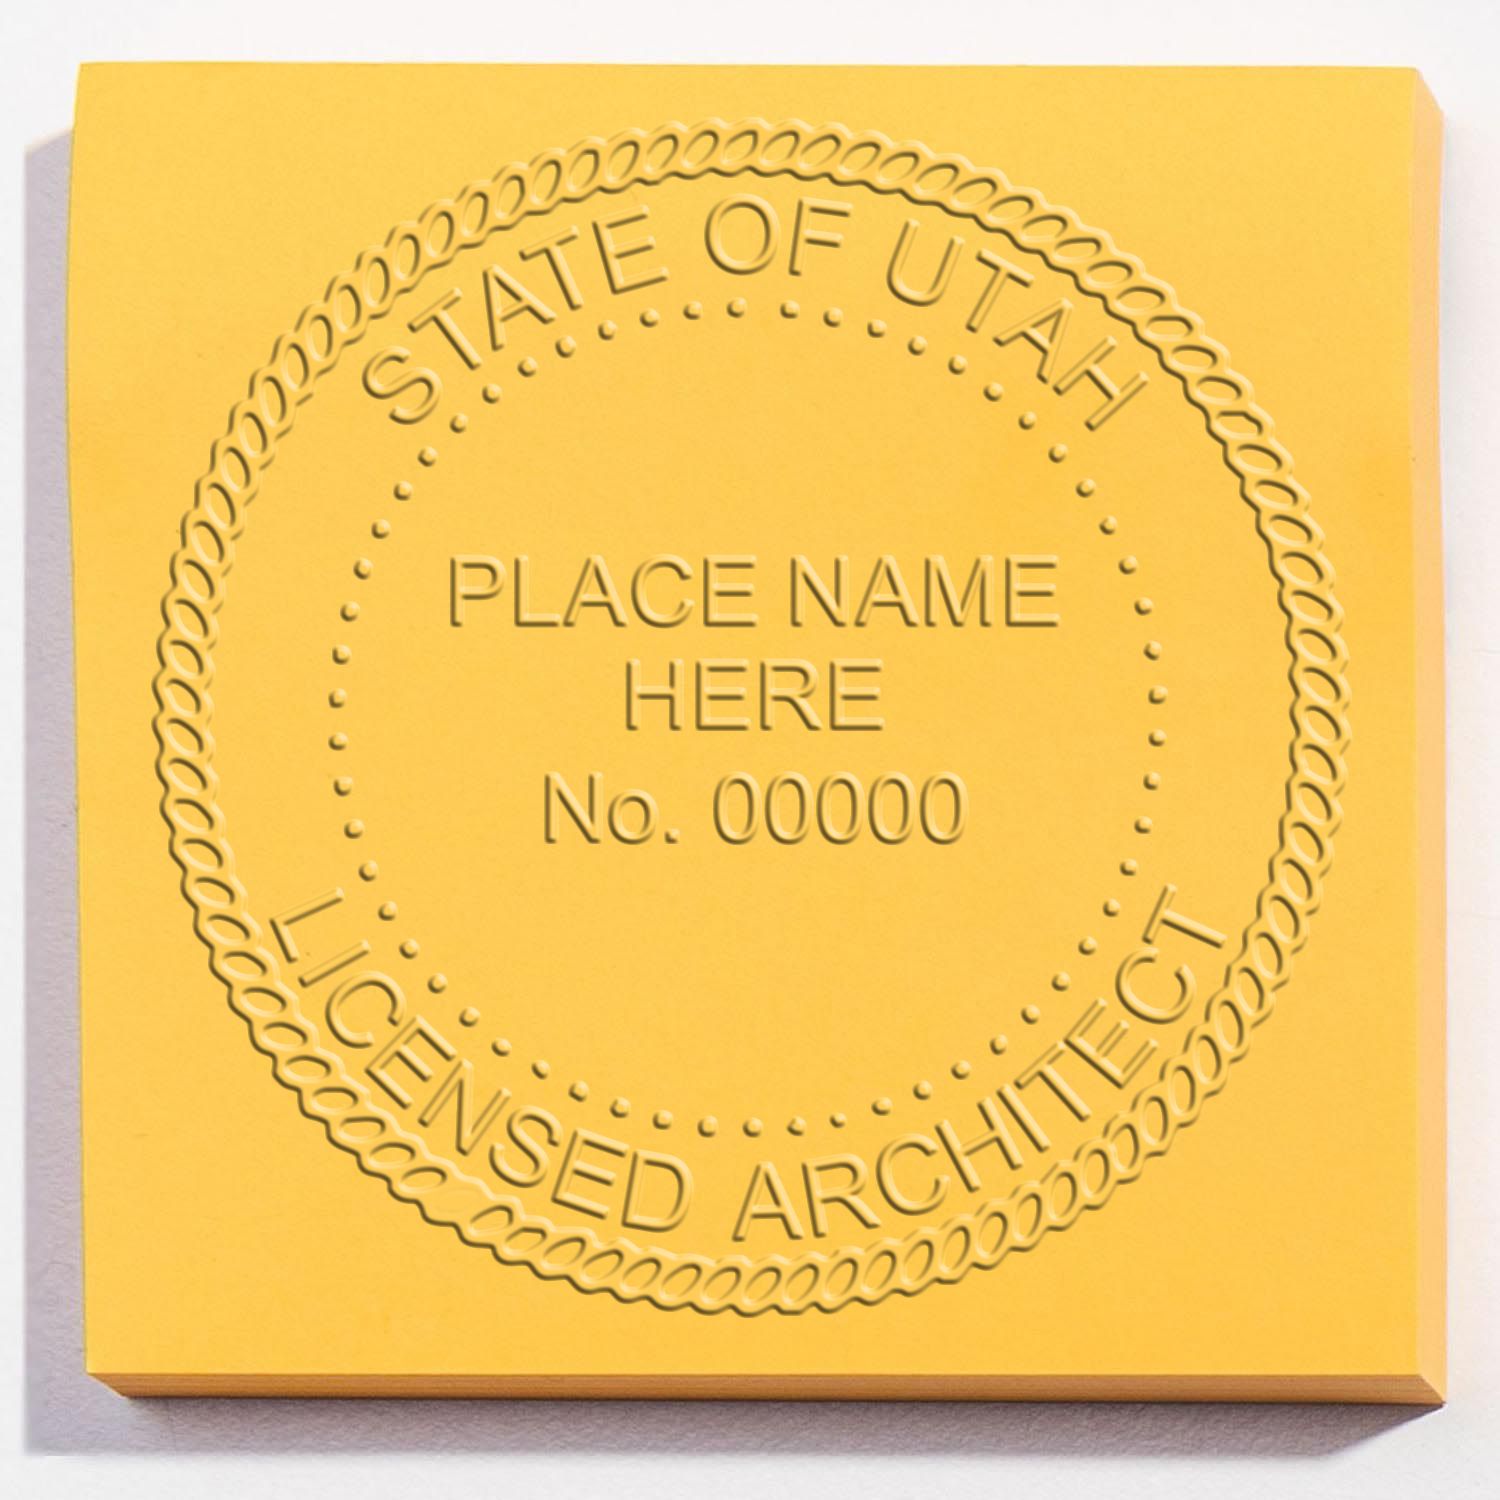 The Gift Utah Architect Seal stamp impression comes to life with a crisp, detailed image stamped on paper - showcasing true professional quality.